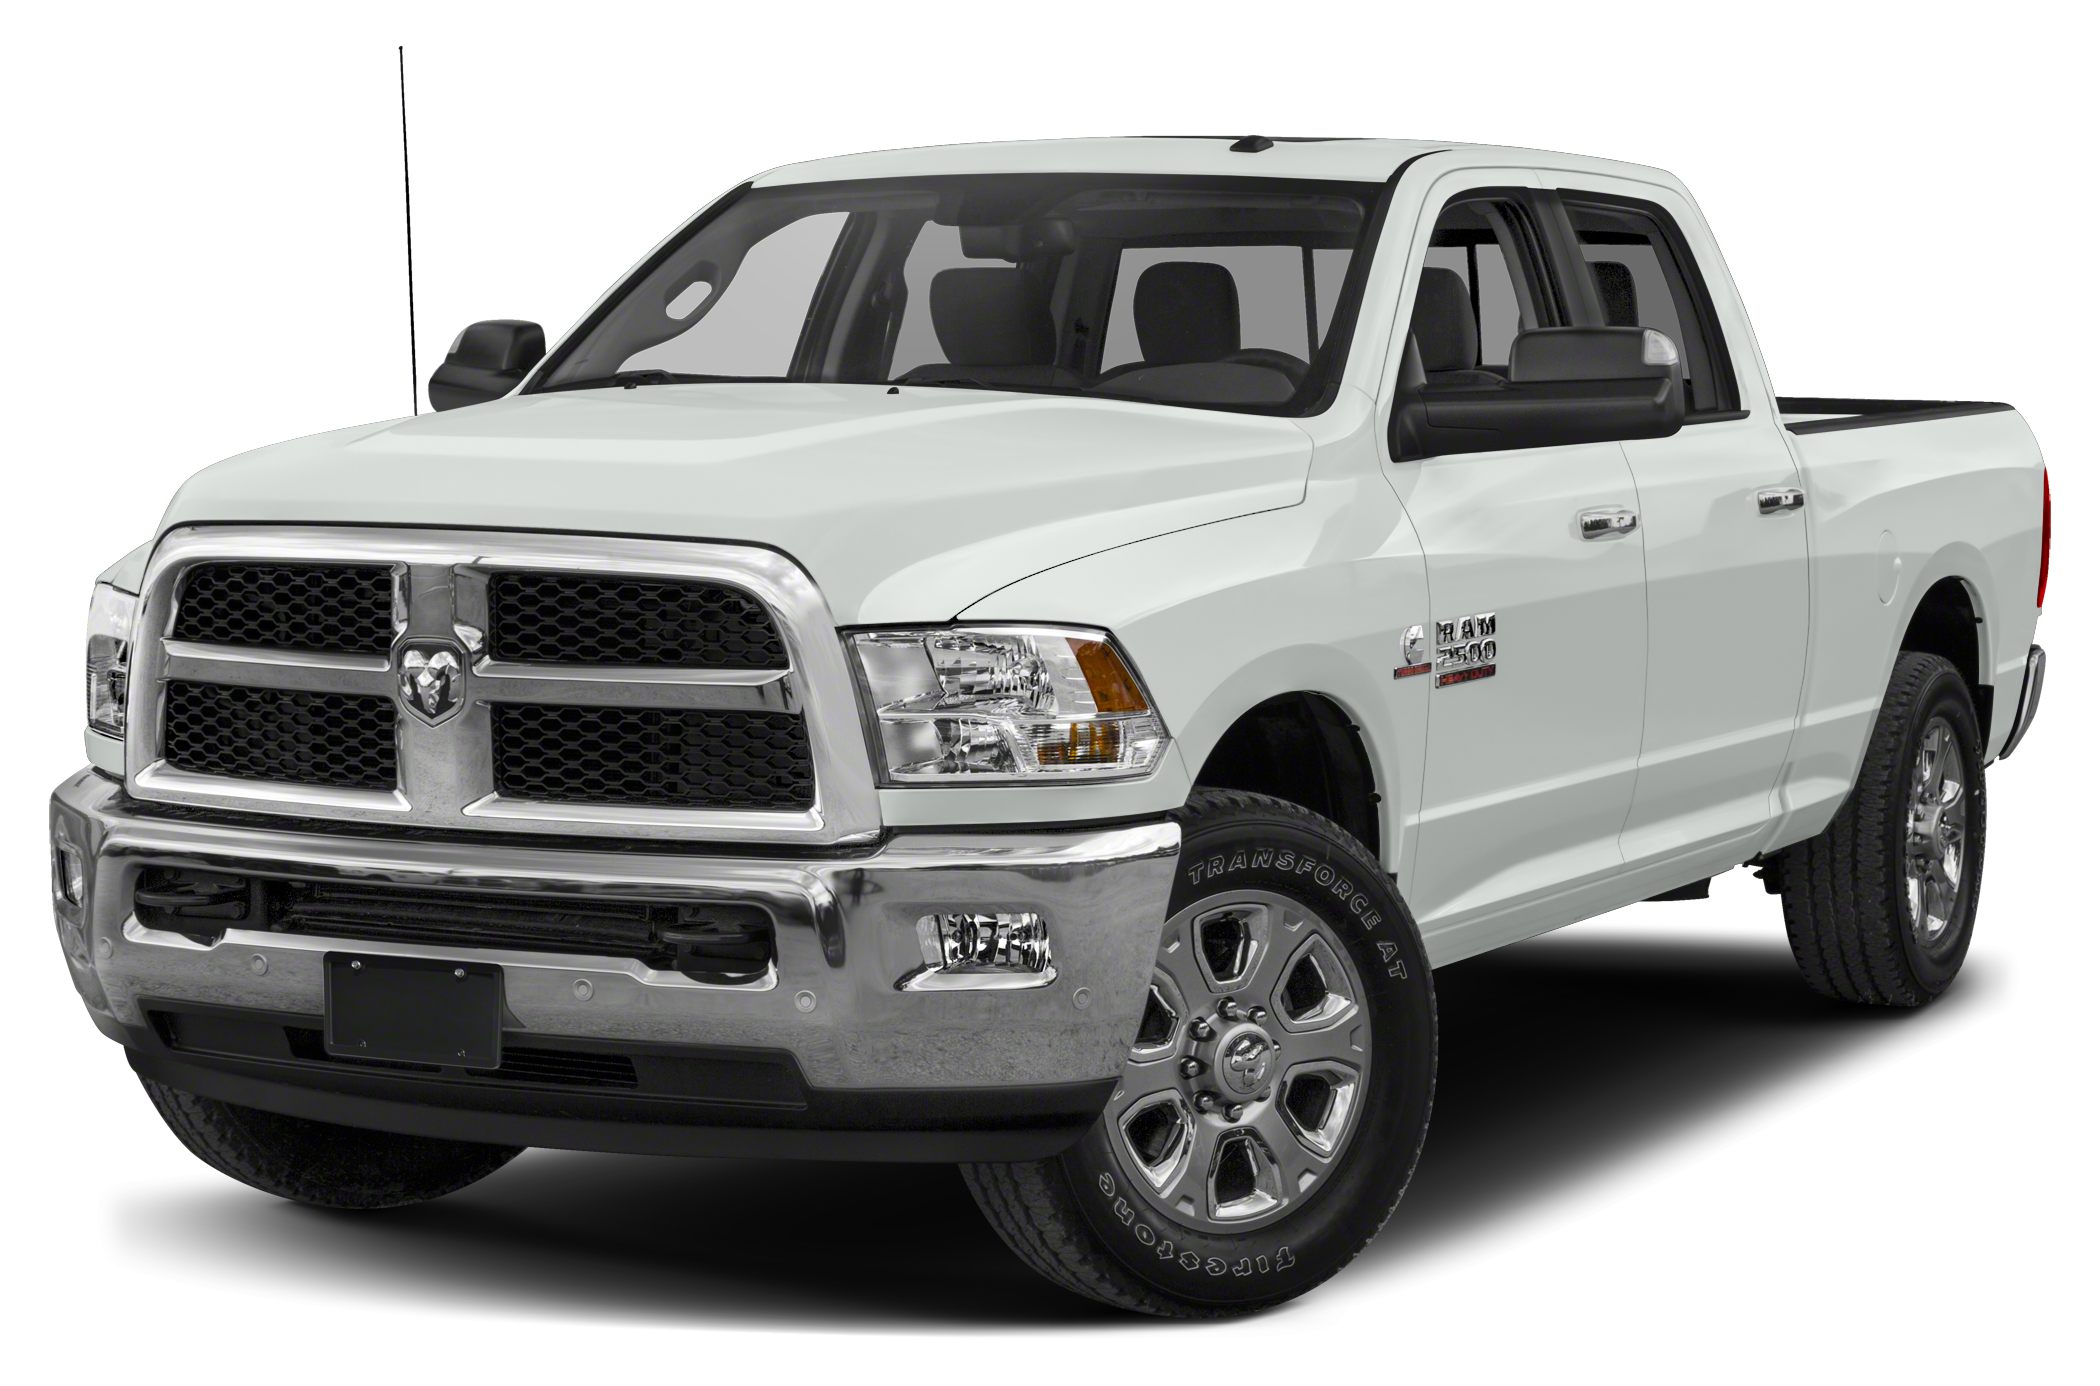 2018 Ram 2500 oem parts and accessories on sale